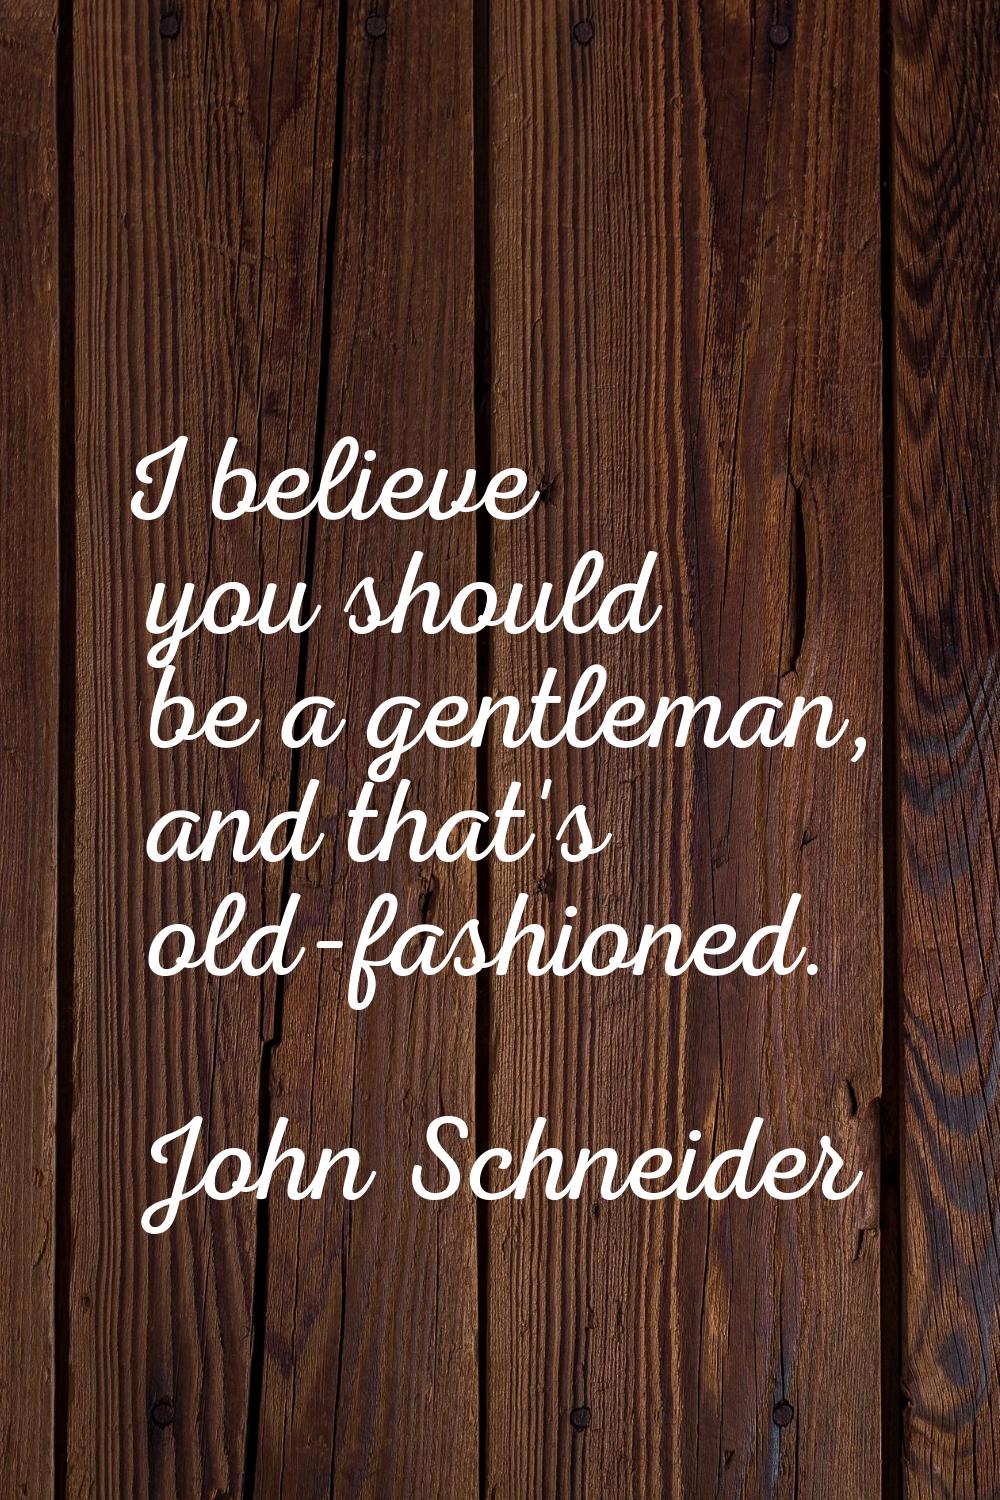 I believe you should be a gentleman, and that's old-fashioned.